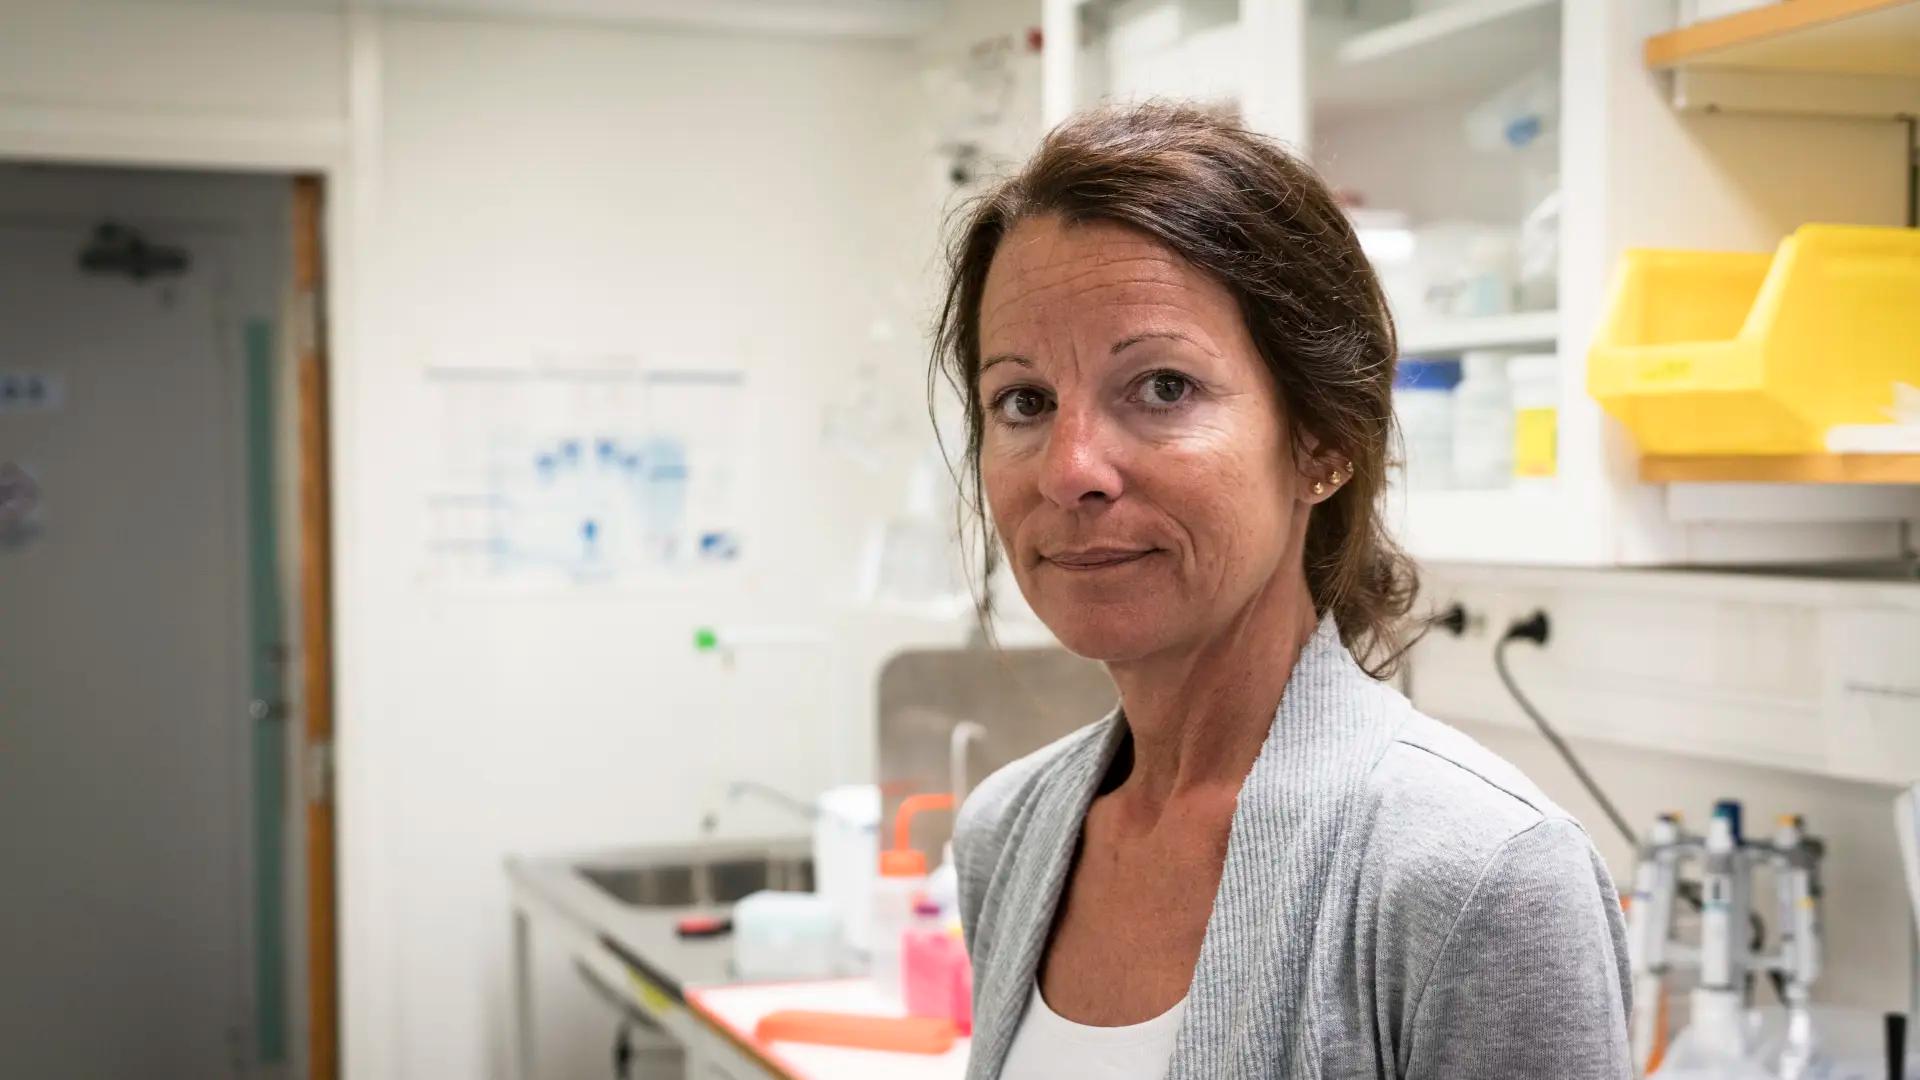 Pernilla Wittung-Stafshede, Professor of Chemical Biology